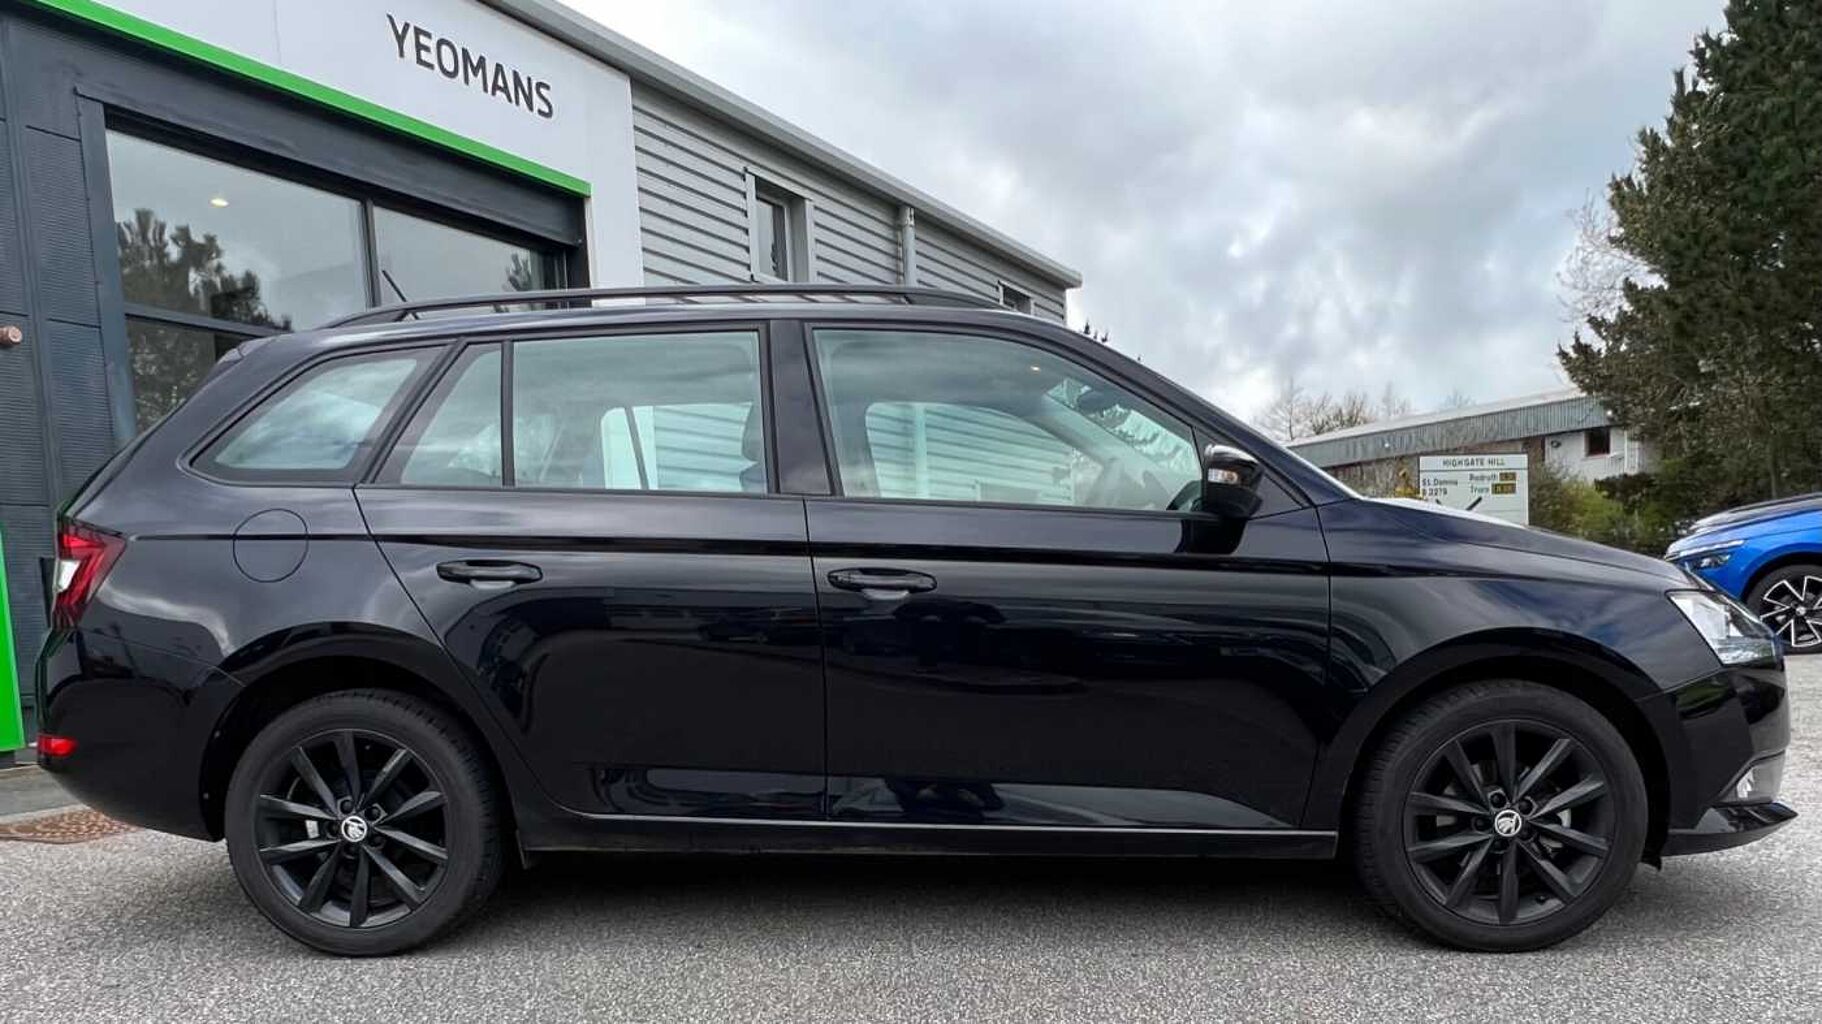 SKODA ROOMSTER black-edition Used - the parking